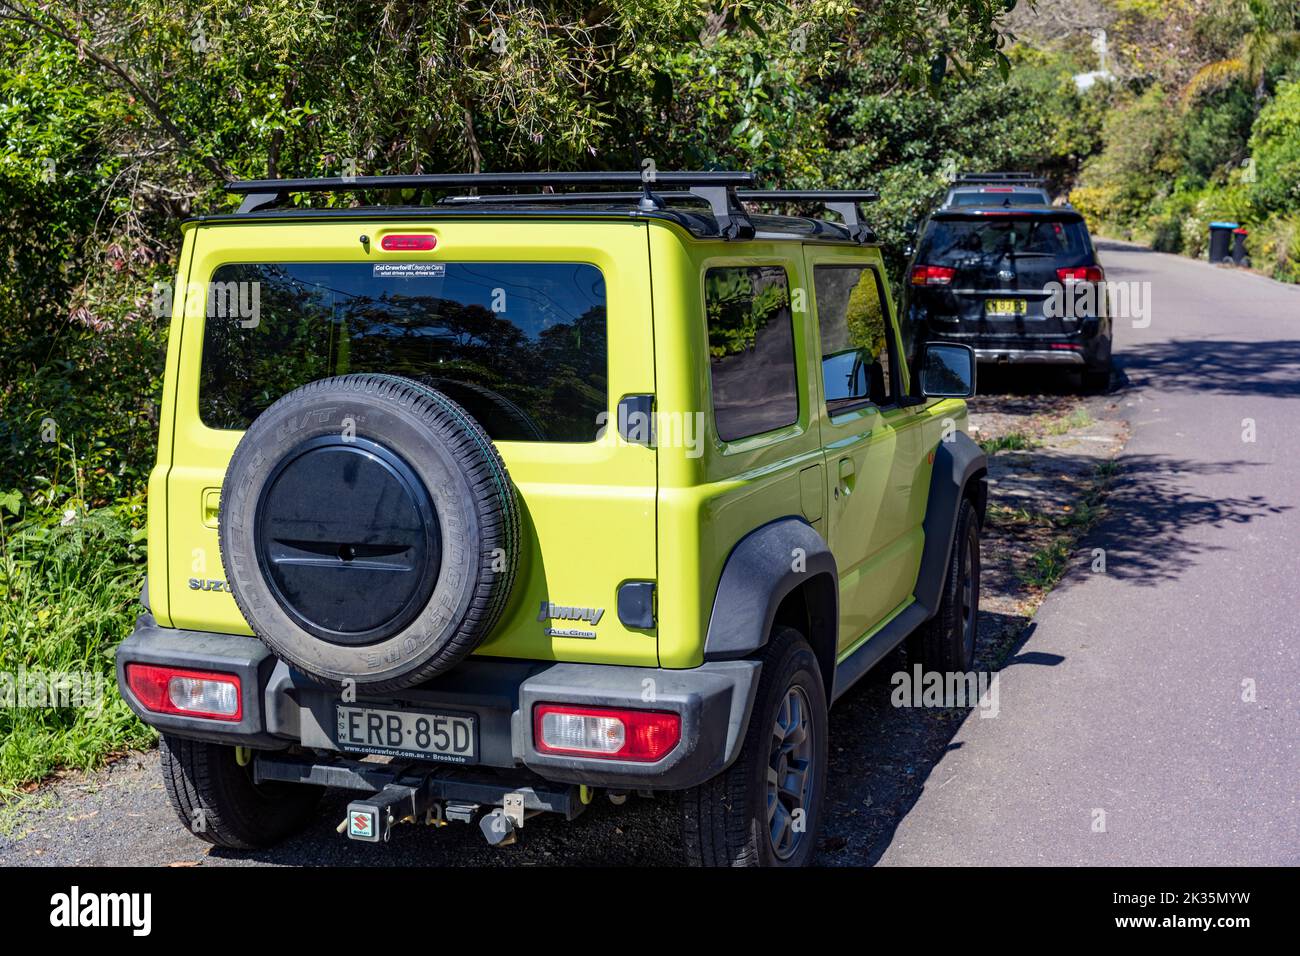 Suzuki Jimny in yellow parked in a street in Whale Beach suburb of Sydney, 4x4 small vehicle,NSW,Australia spring day Stock Photo